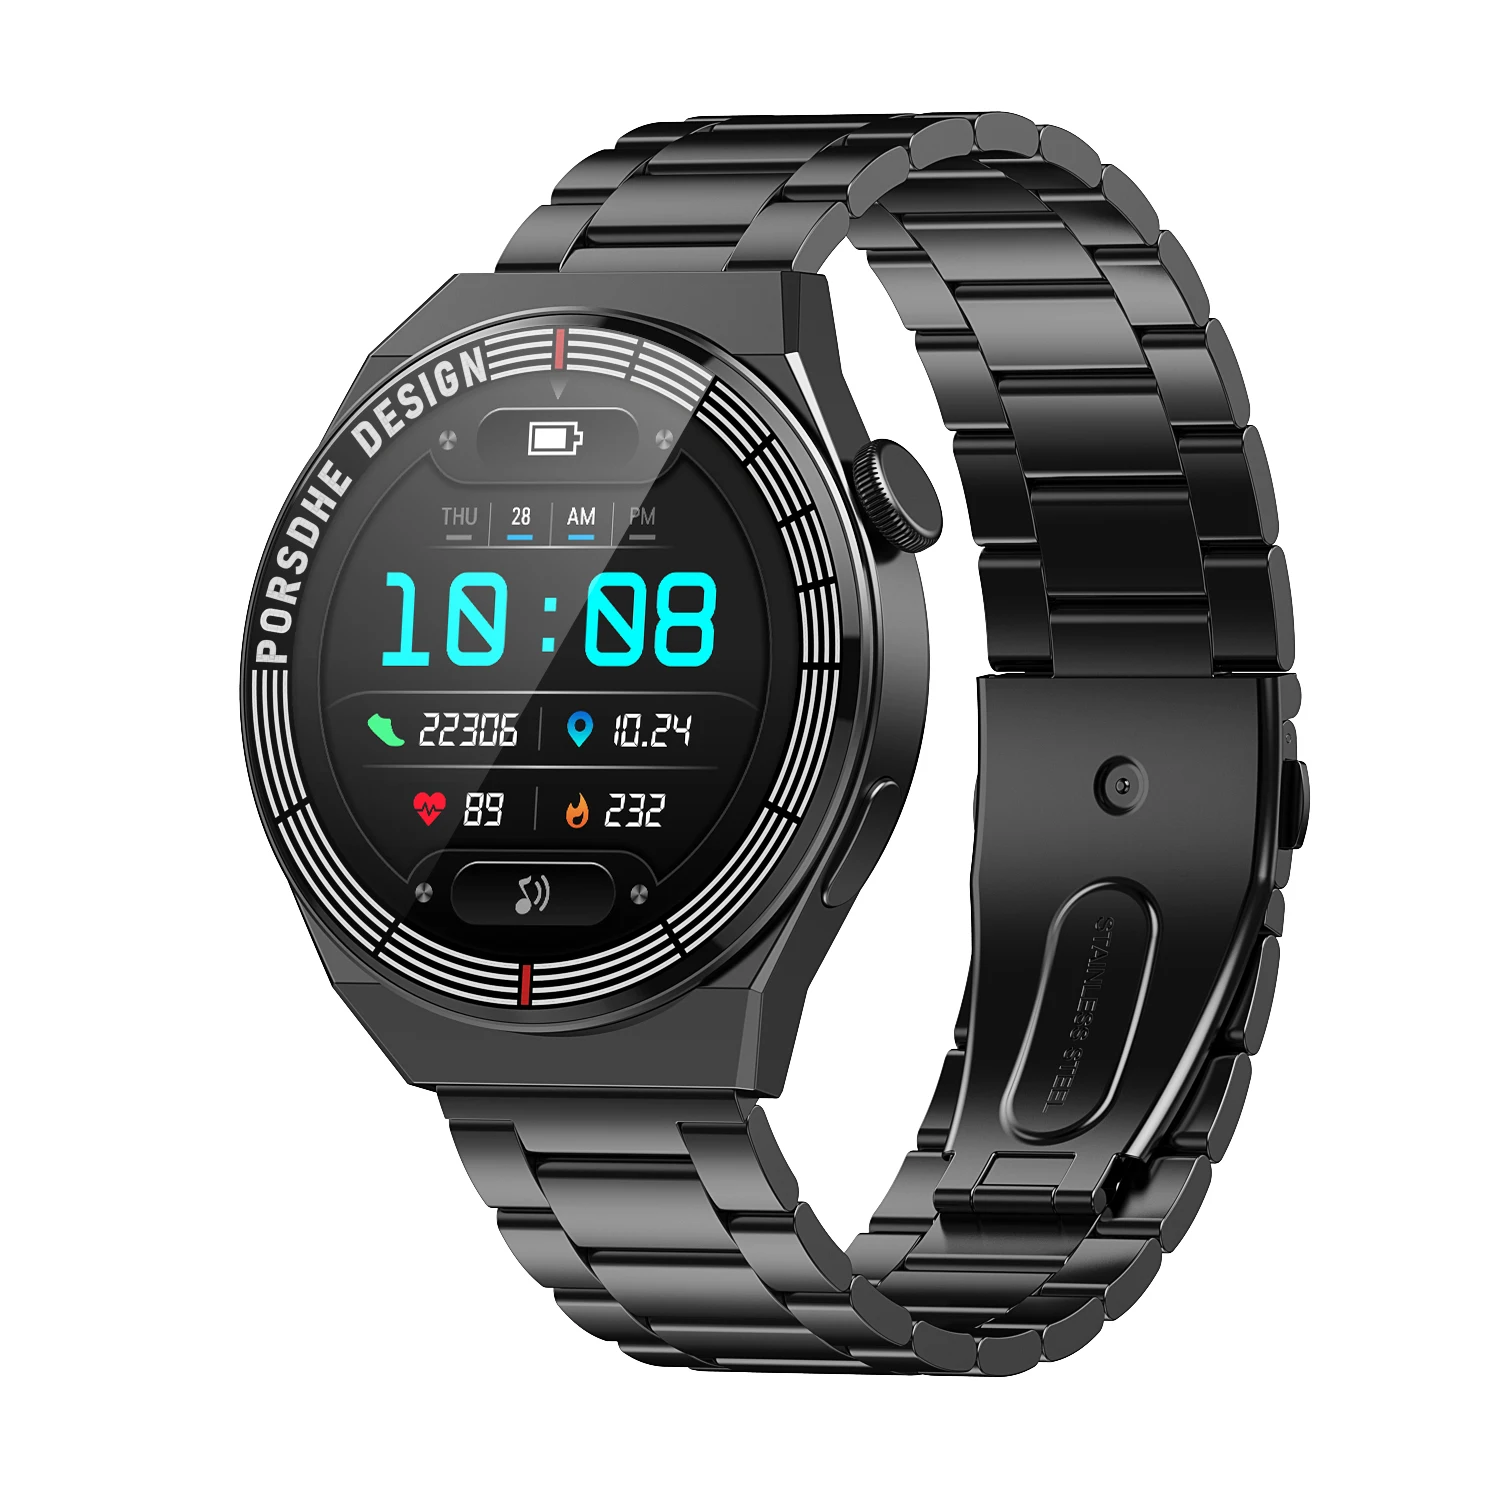 under Karriere annoncere Wholesale New Smartwatch T6 PRO Round Full Touch Reloj Inteligente Fitness  Tracker Heart Rate Blood Oxygen Monitor T6pro Smart Watch From m.alibaba.com